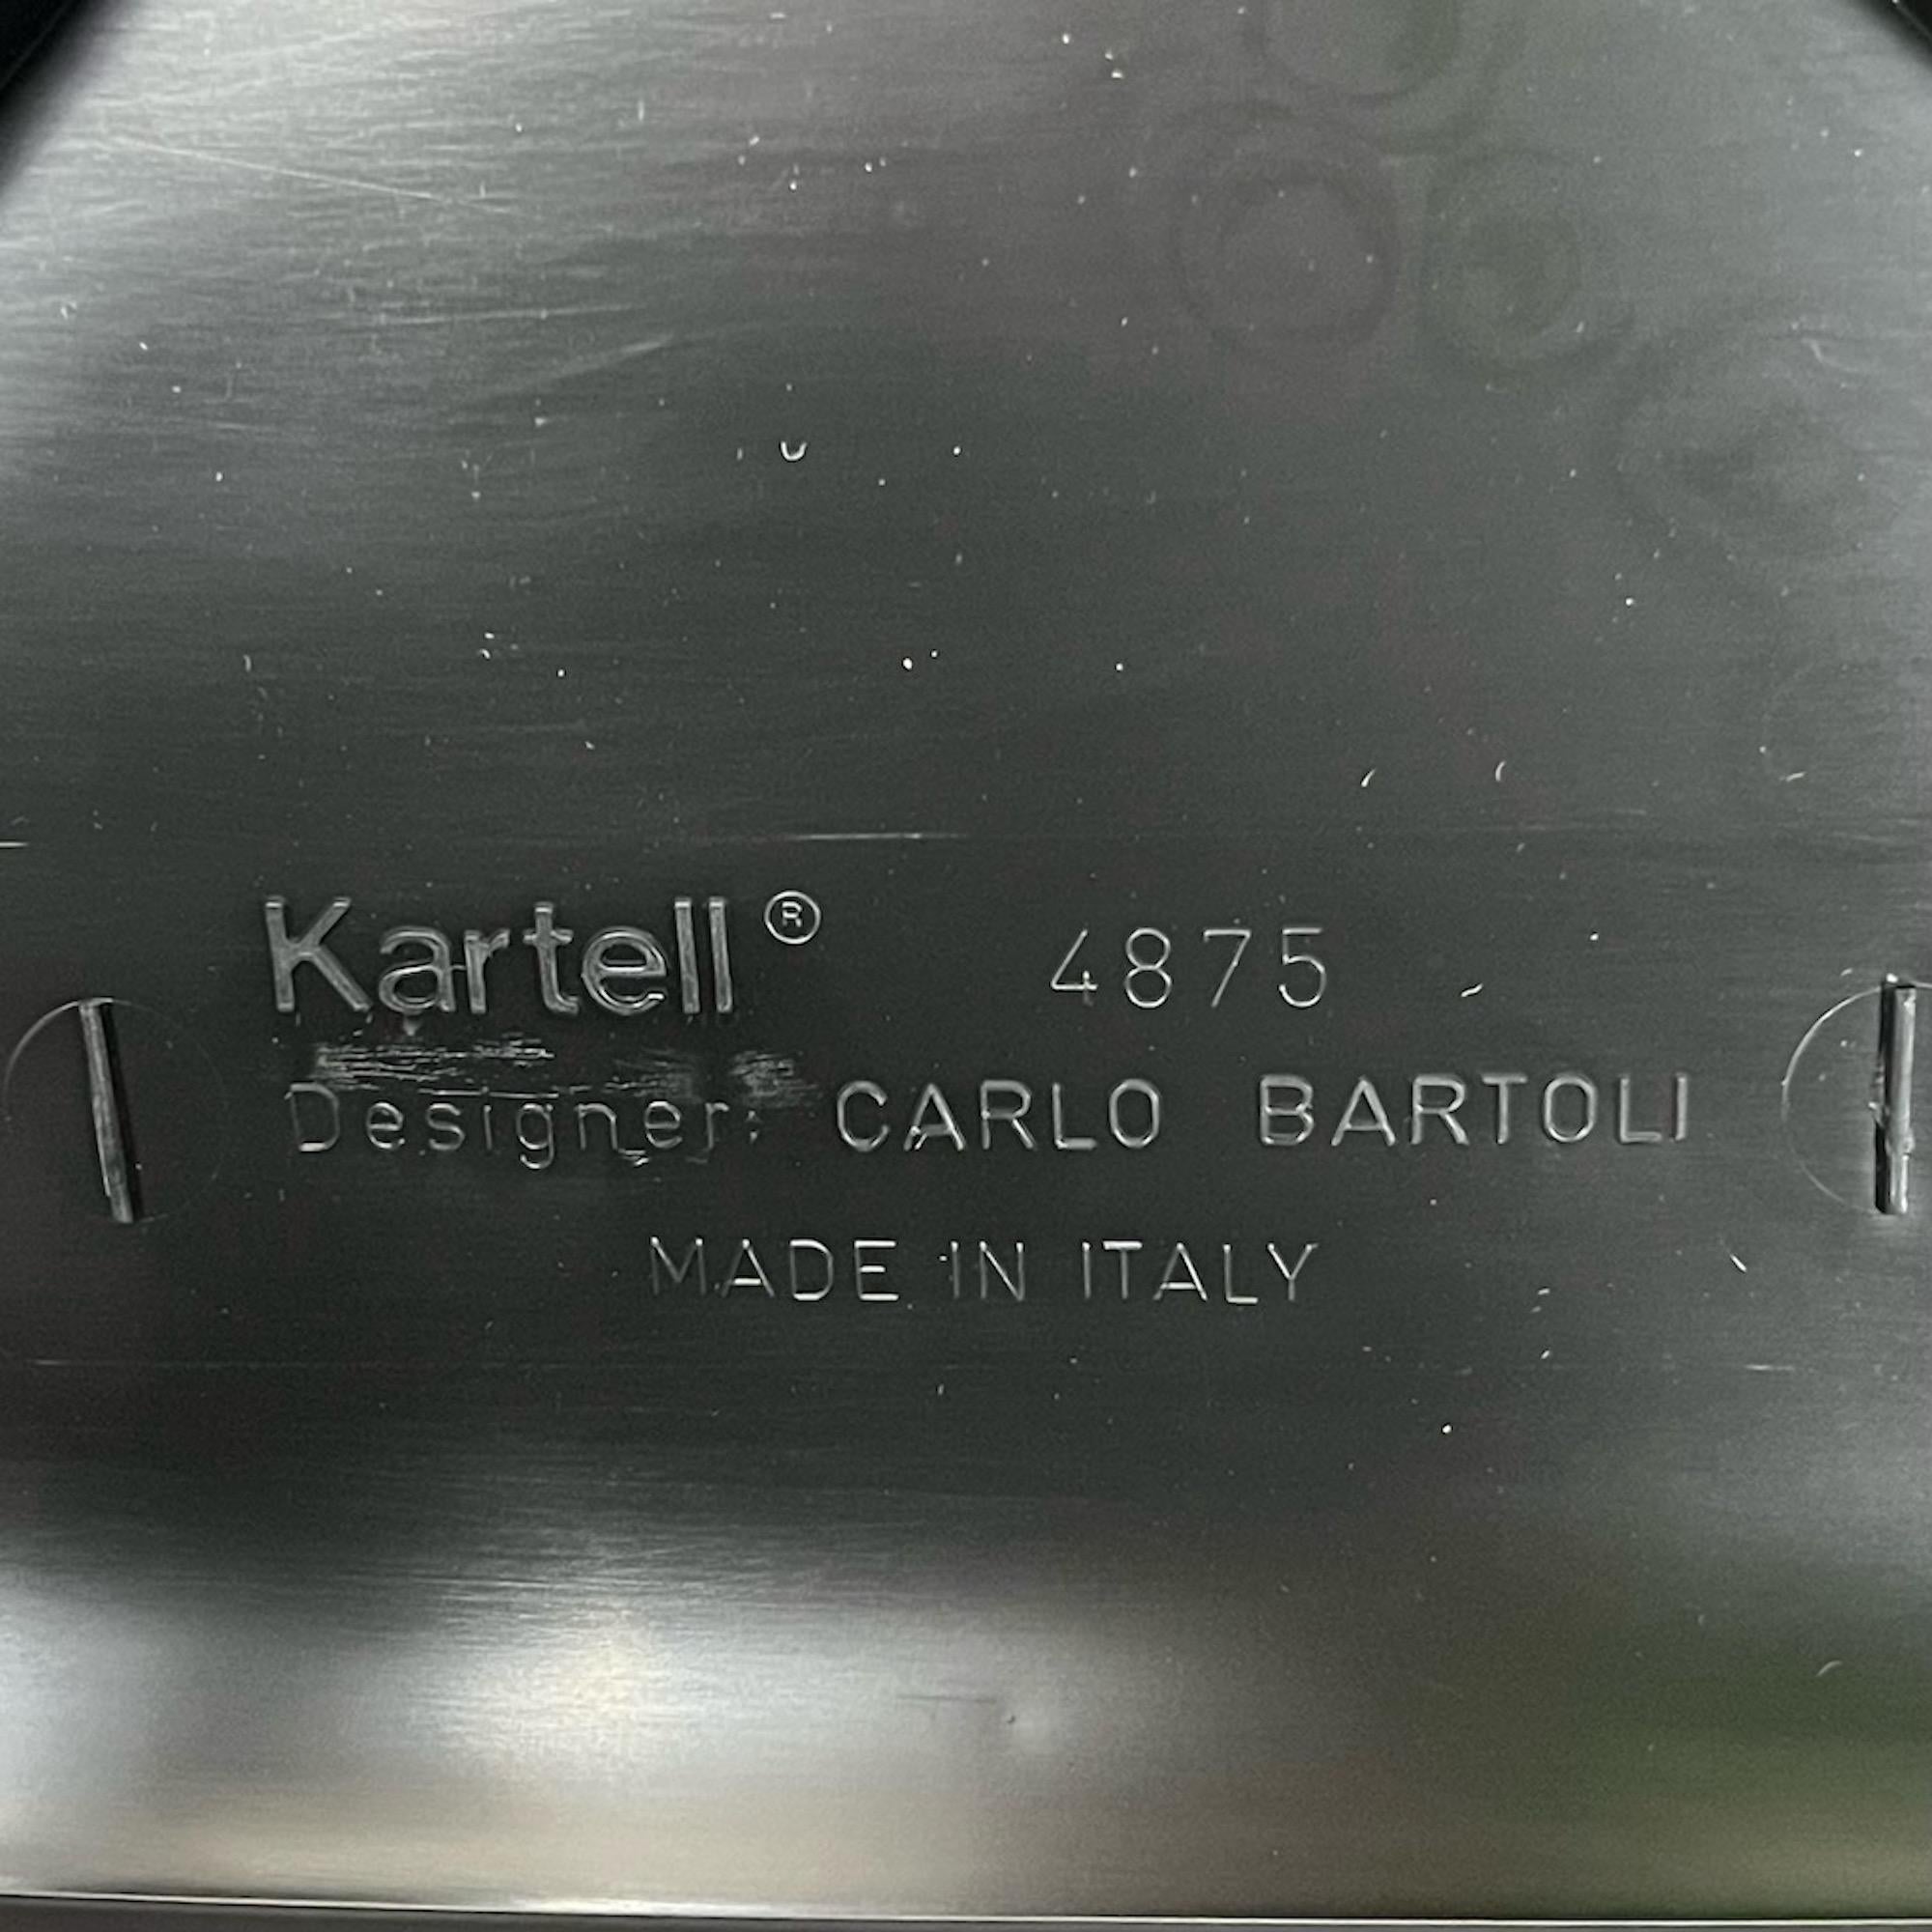 Kartell Model 4875 Chair by Carlo Bartoli - 1985 Edition New Old Stock in Black 1